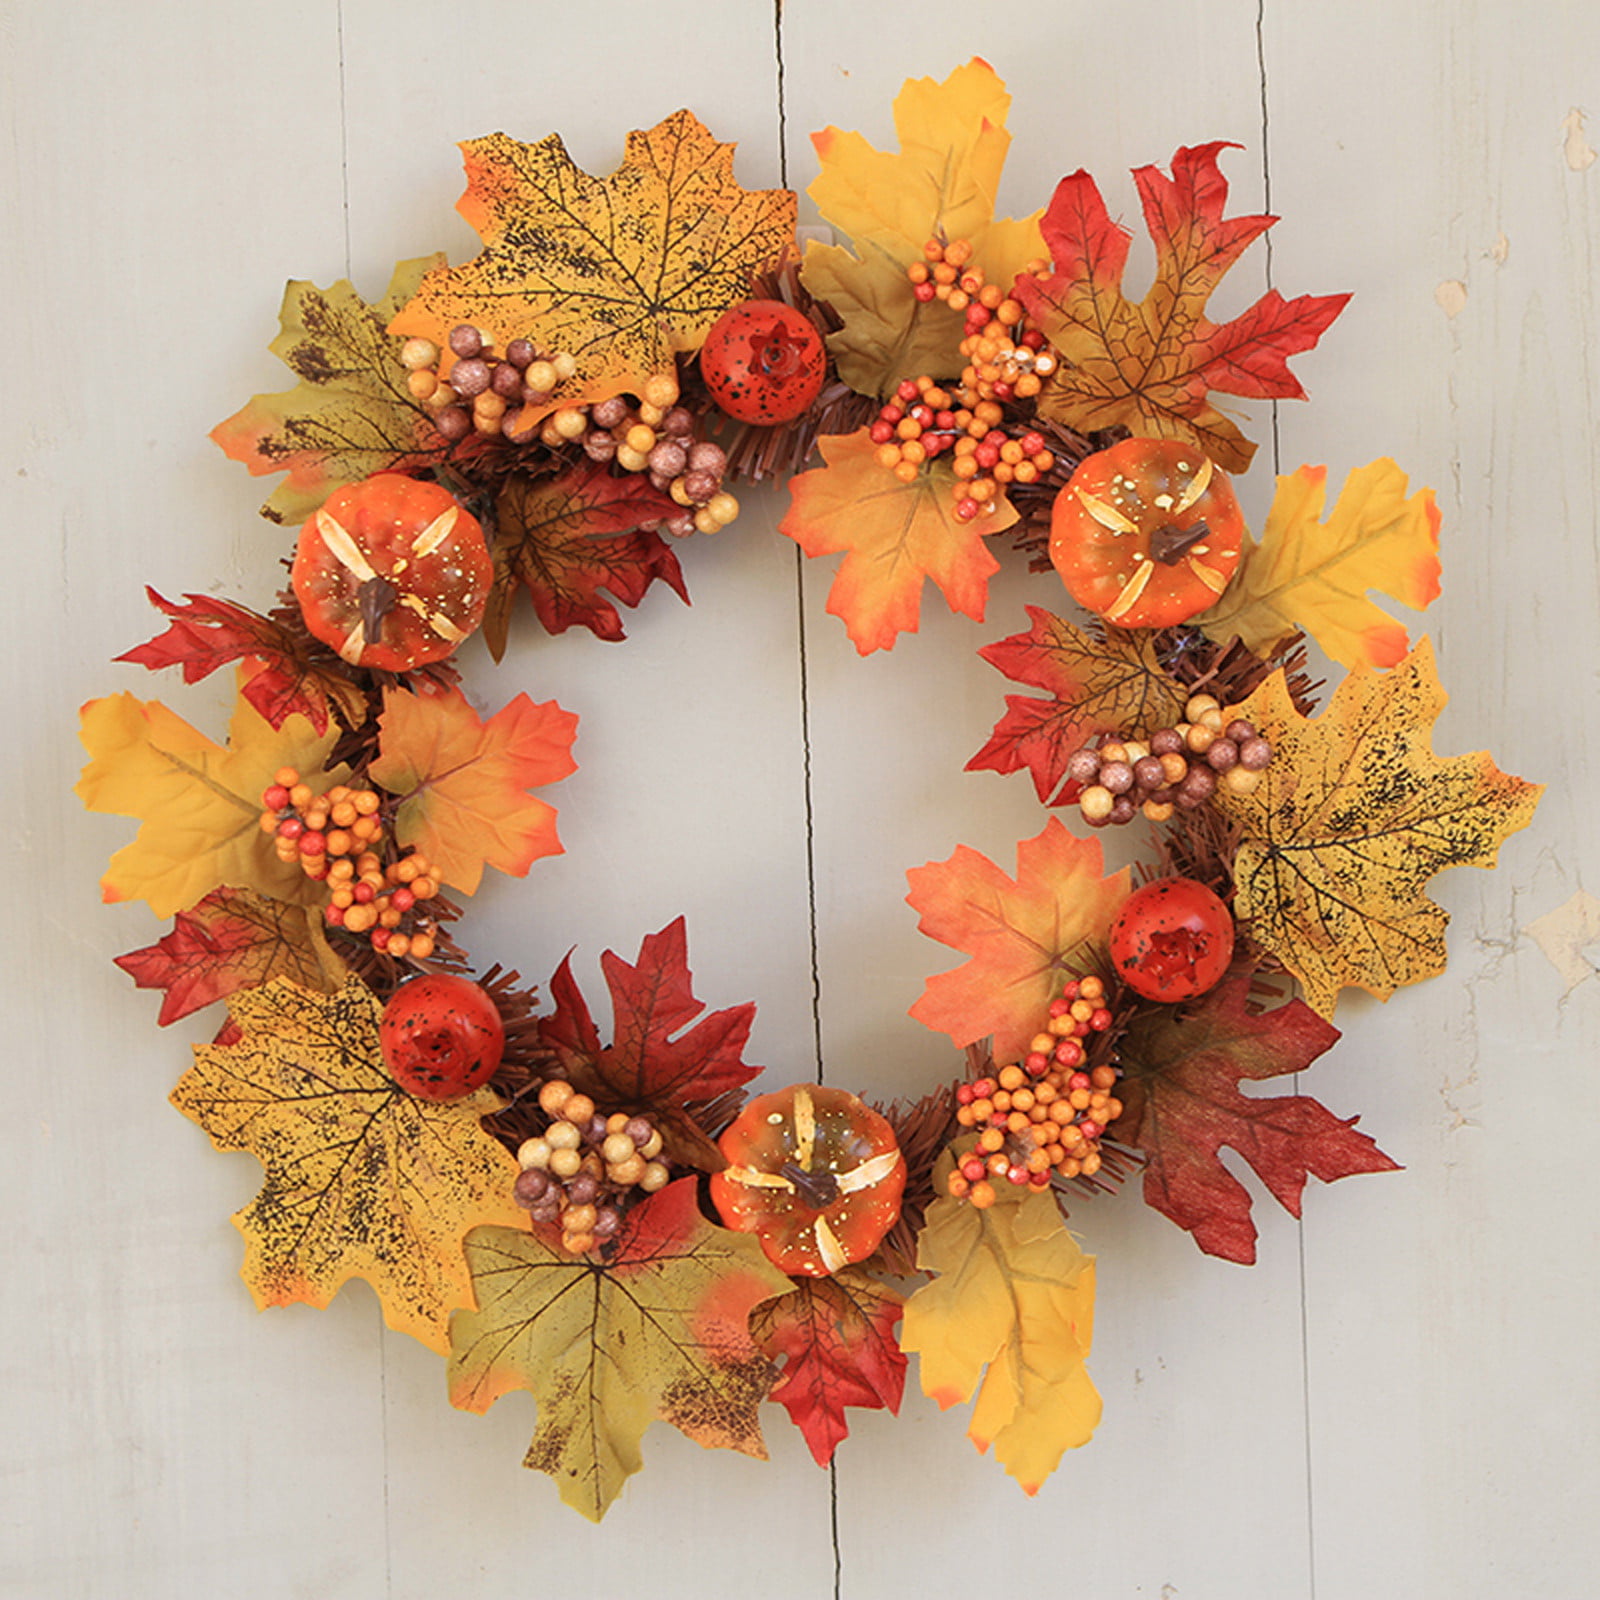 How To Create A Cute And Easy Fall Door Decor Home & Family thumbnail